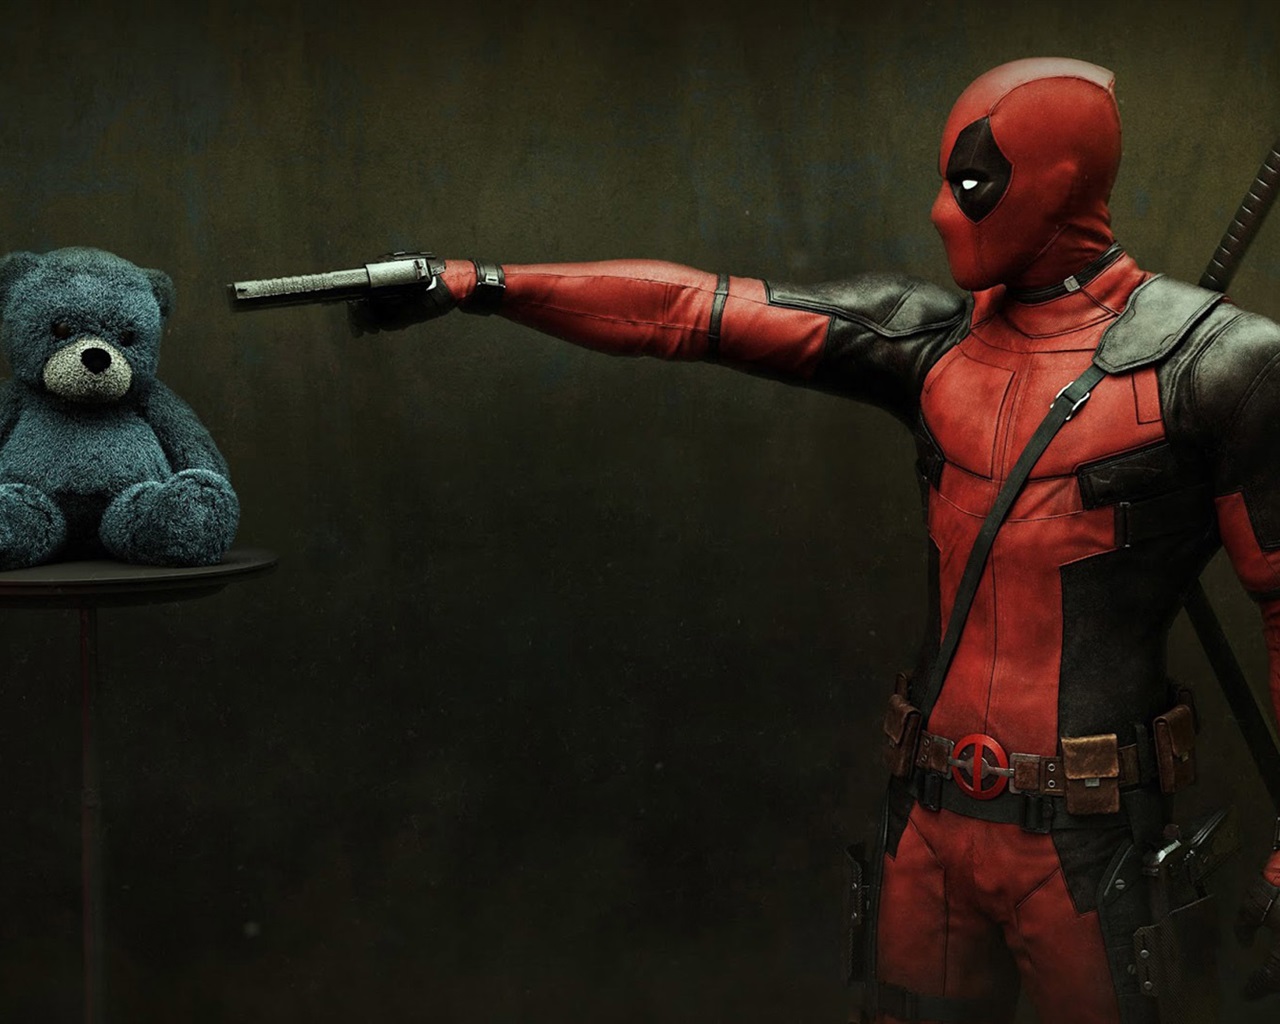 Wallpaper Deadpool and Teddy Bear 1920x1080 Full HD 2K Picture, Image